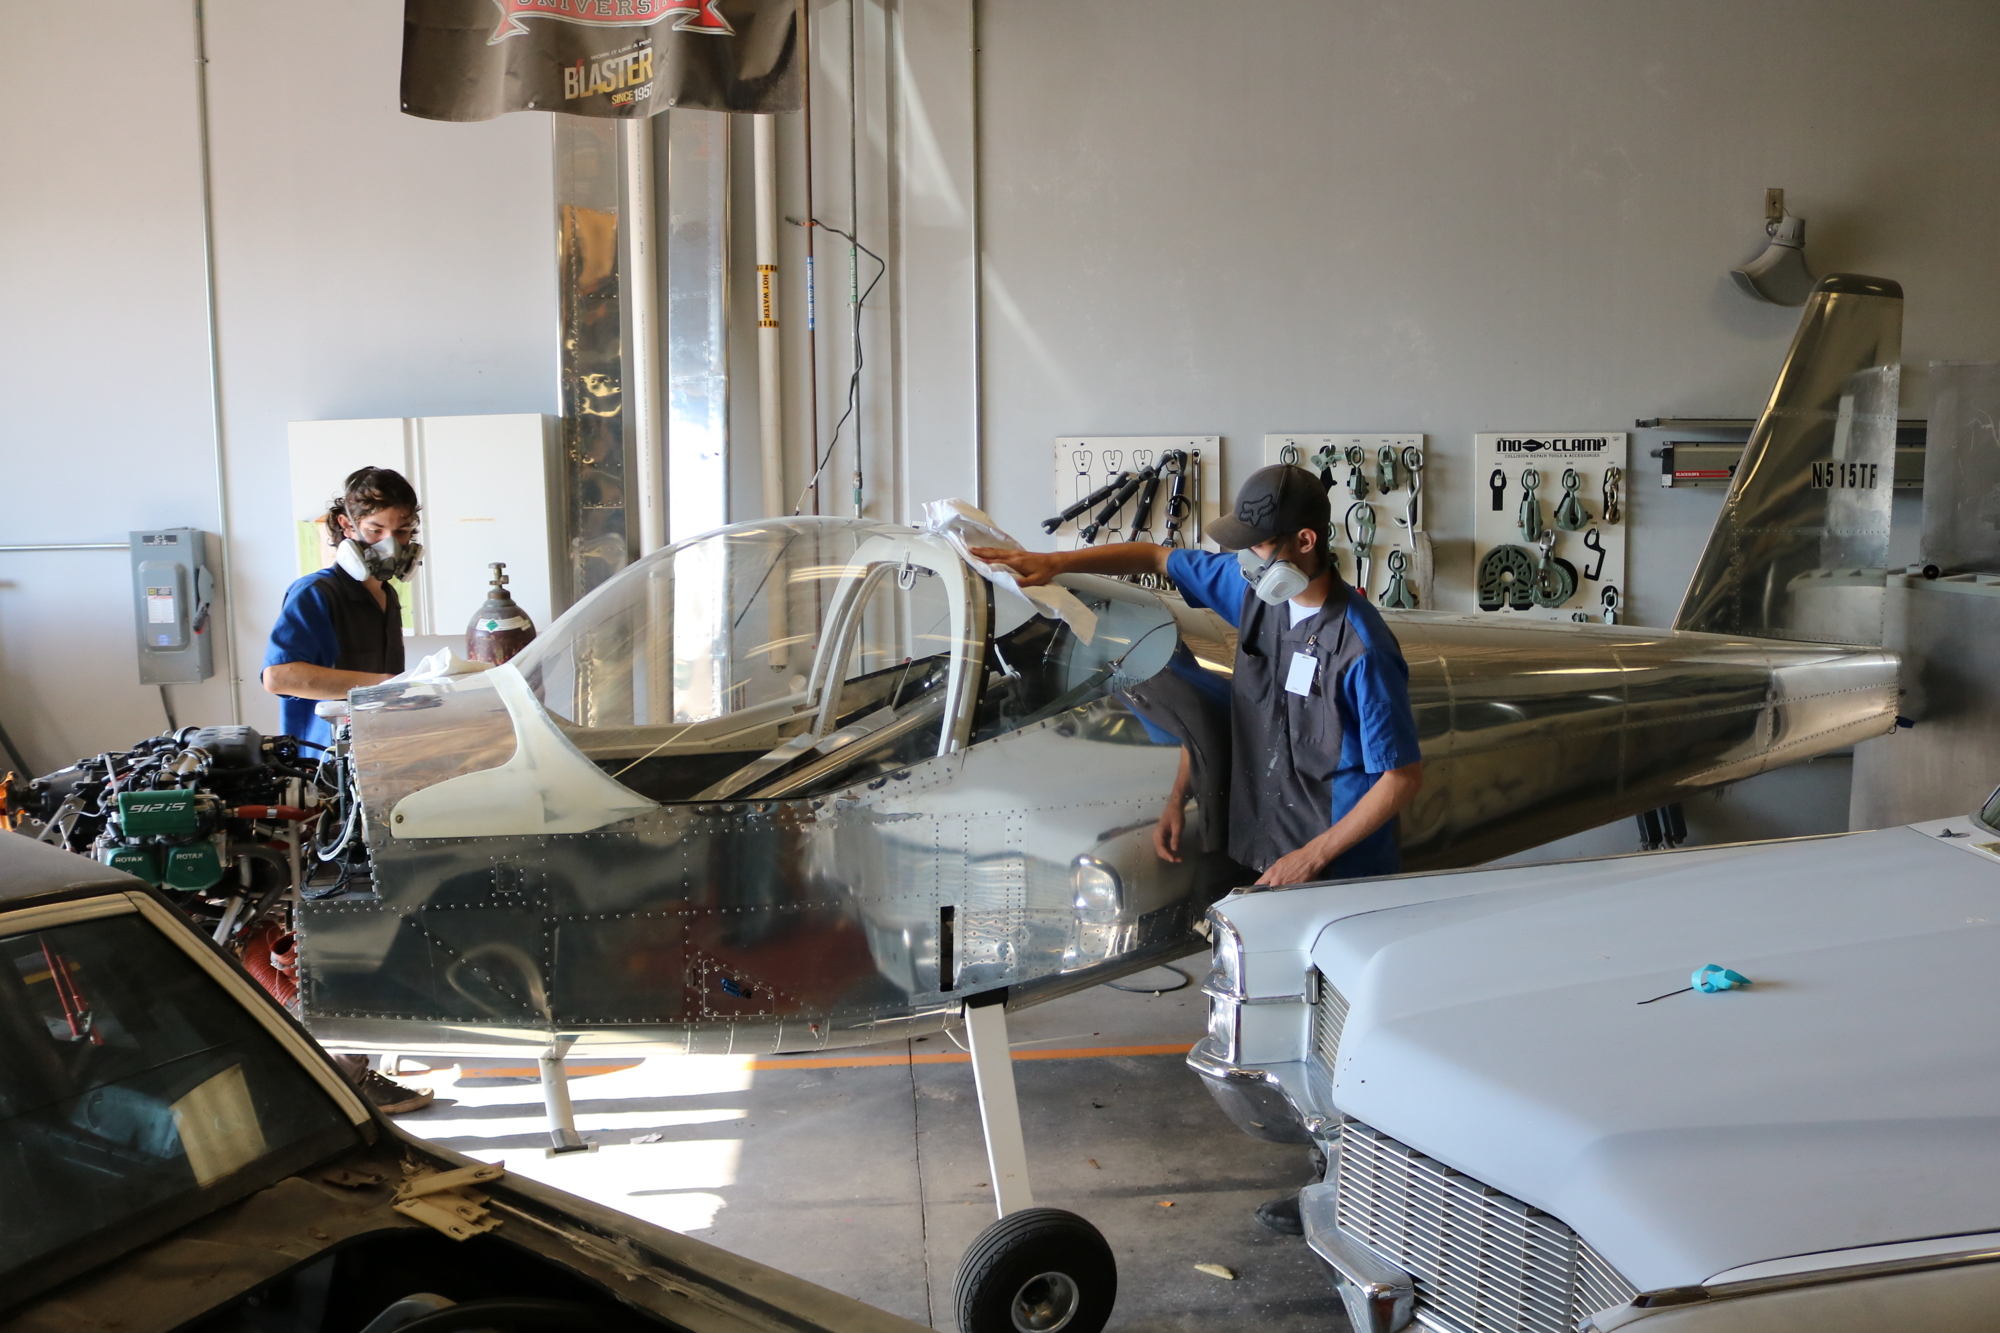 Ryder Wahlsmith and Ryan Yates, who are Manatee Technical College Auto Collision Technology students, wipe down the airplane to prepare to paint it. Courtesy photo.